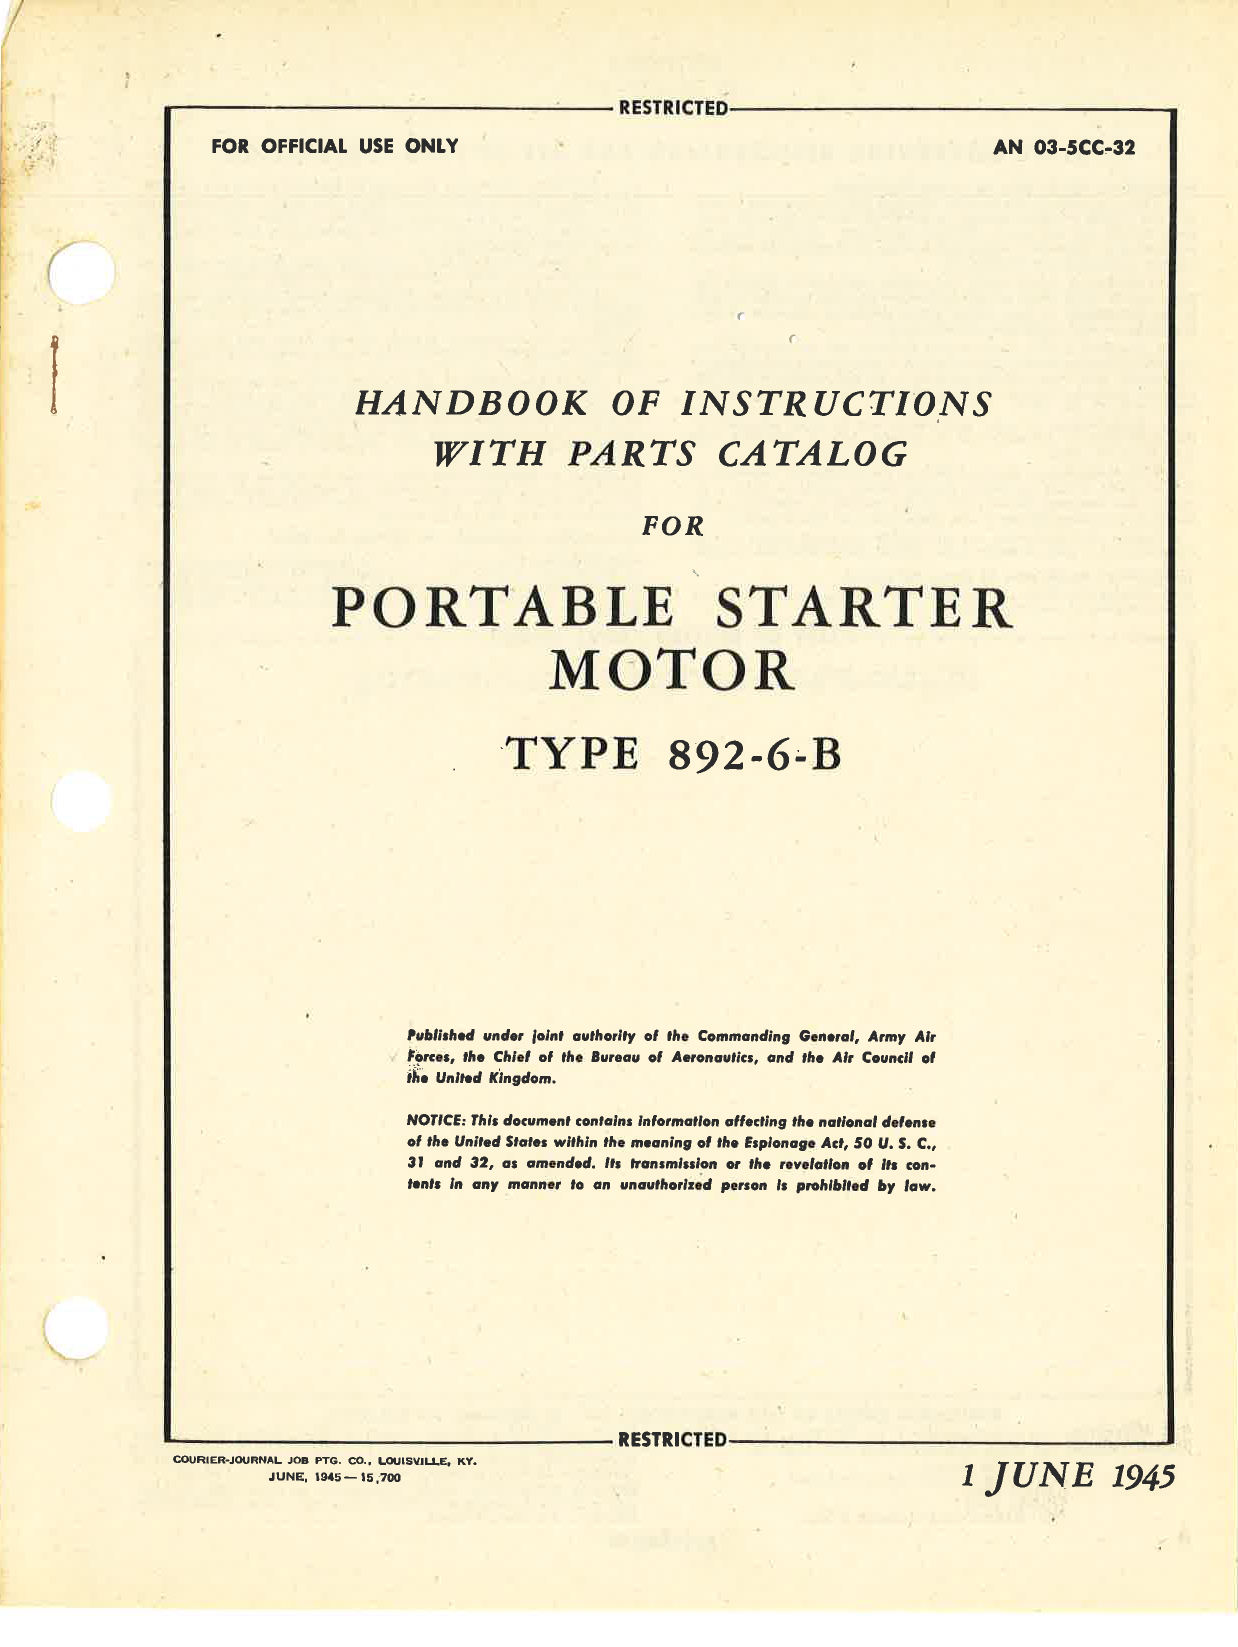 Sample page 1 from AirCorps Library document: Handbook of Instructions with Parts Catalog for Portable Starter Motor Type 892-6-B